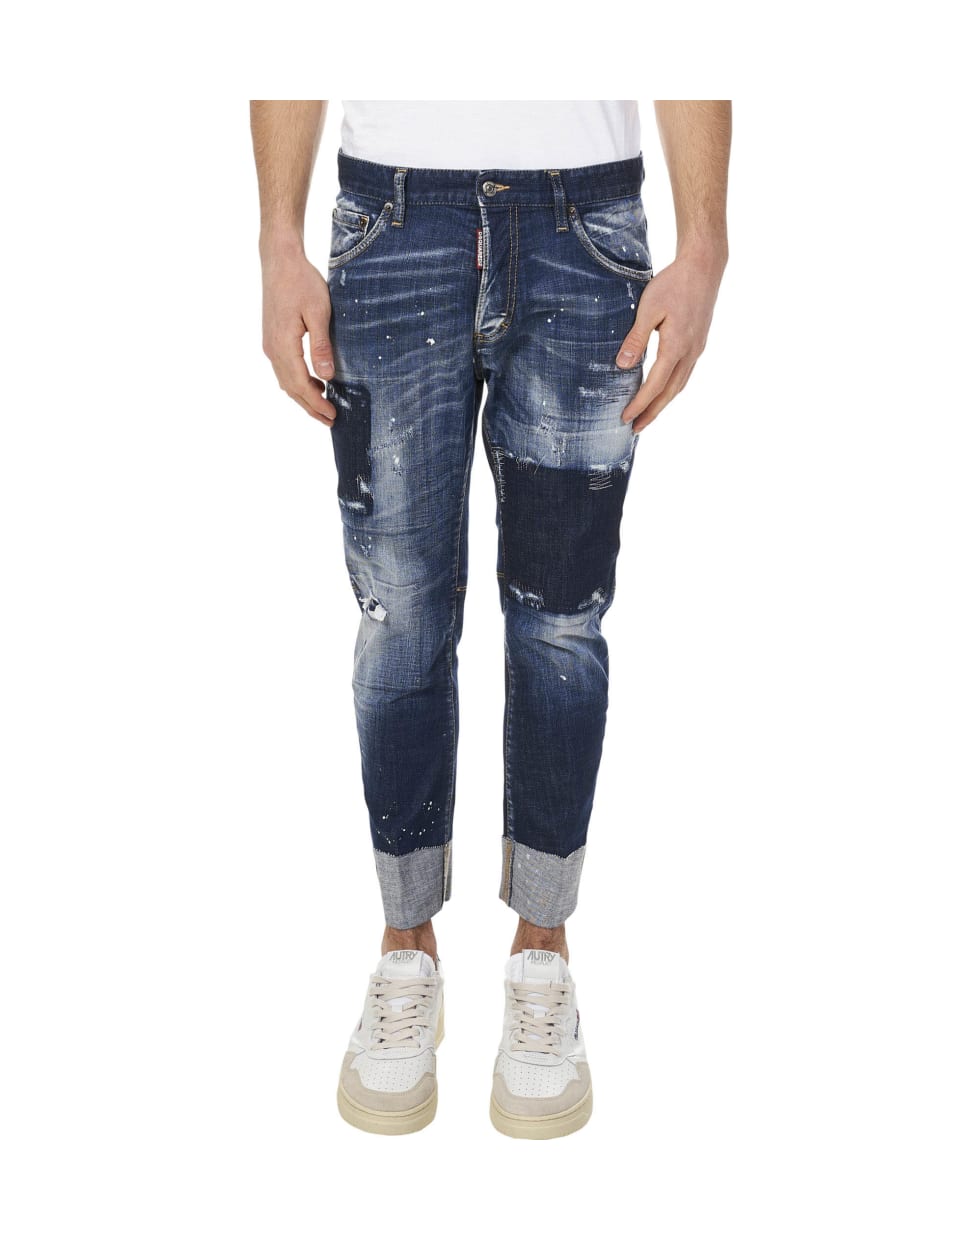 Dsquared2 Dark Reveal Wash Sailor Jeans | italist, ALWAYS LIKE A SALE